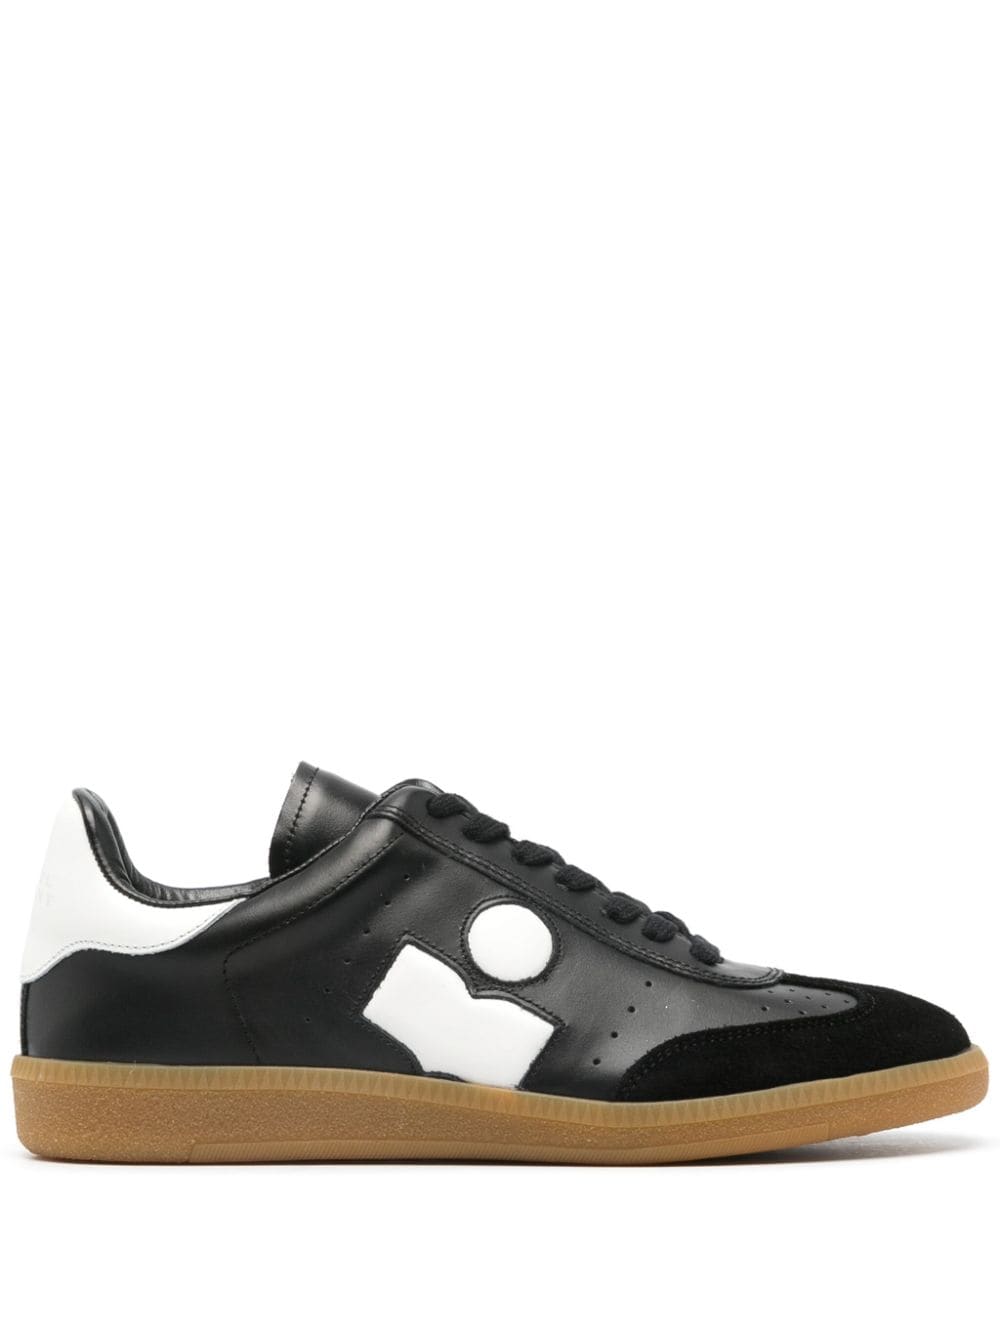 ISABEL MARANT Bryce leather sneakers - Black von ISABEL MARANT